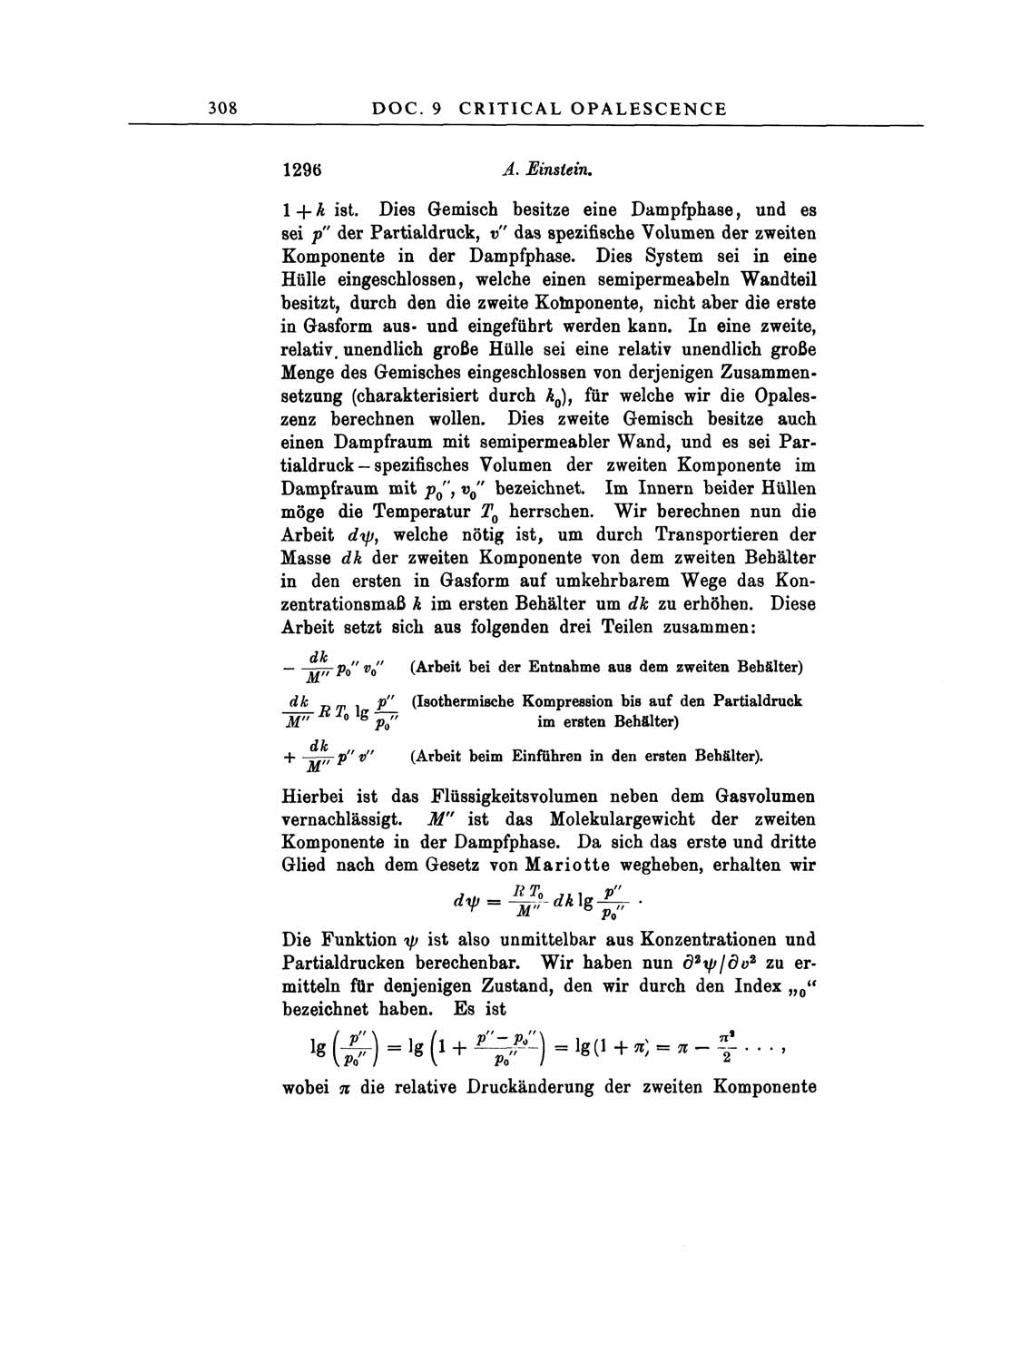 Volume 3: The Swiss Years: Writings 1909-1911 page 308